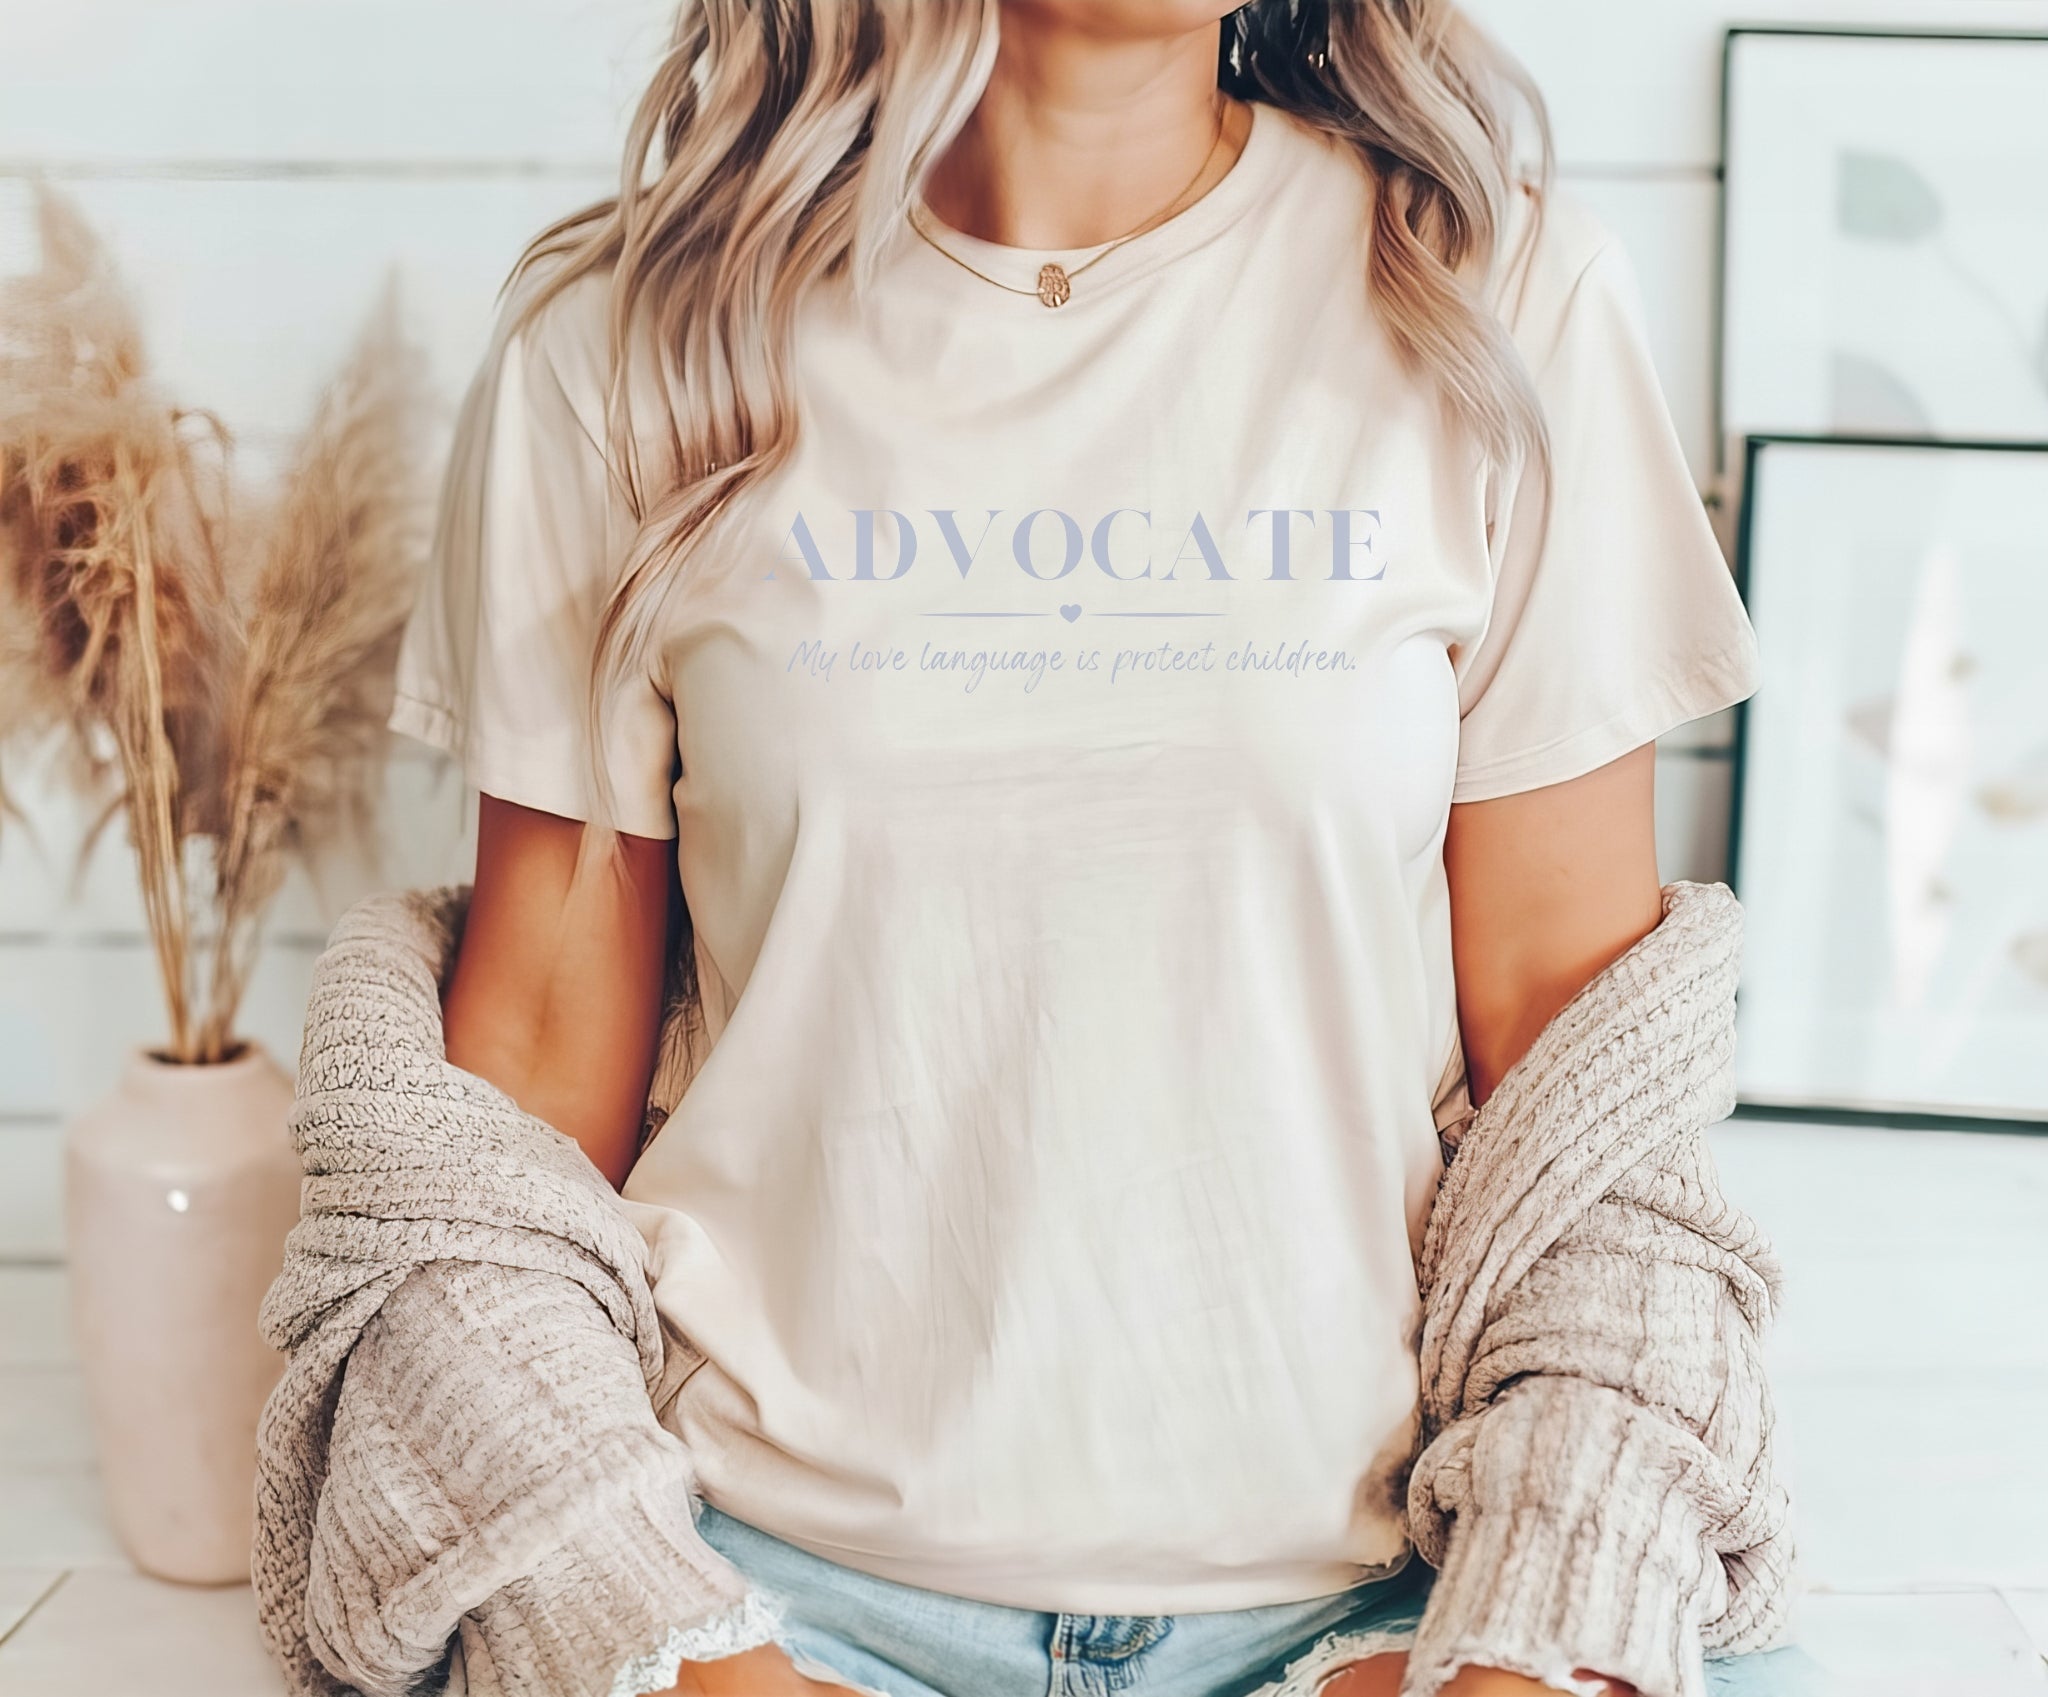 The front of the t-shirt says ADVOCATE my love language is protect children. Perfect for child advocacy, child advocates, and children's mental health advocates